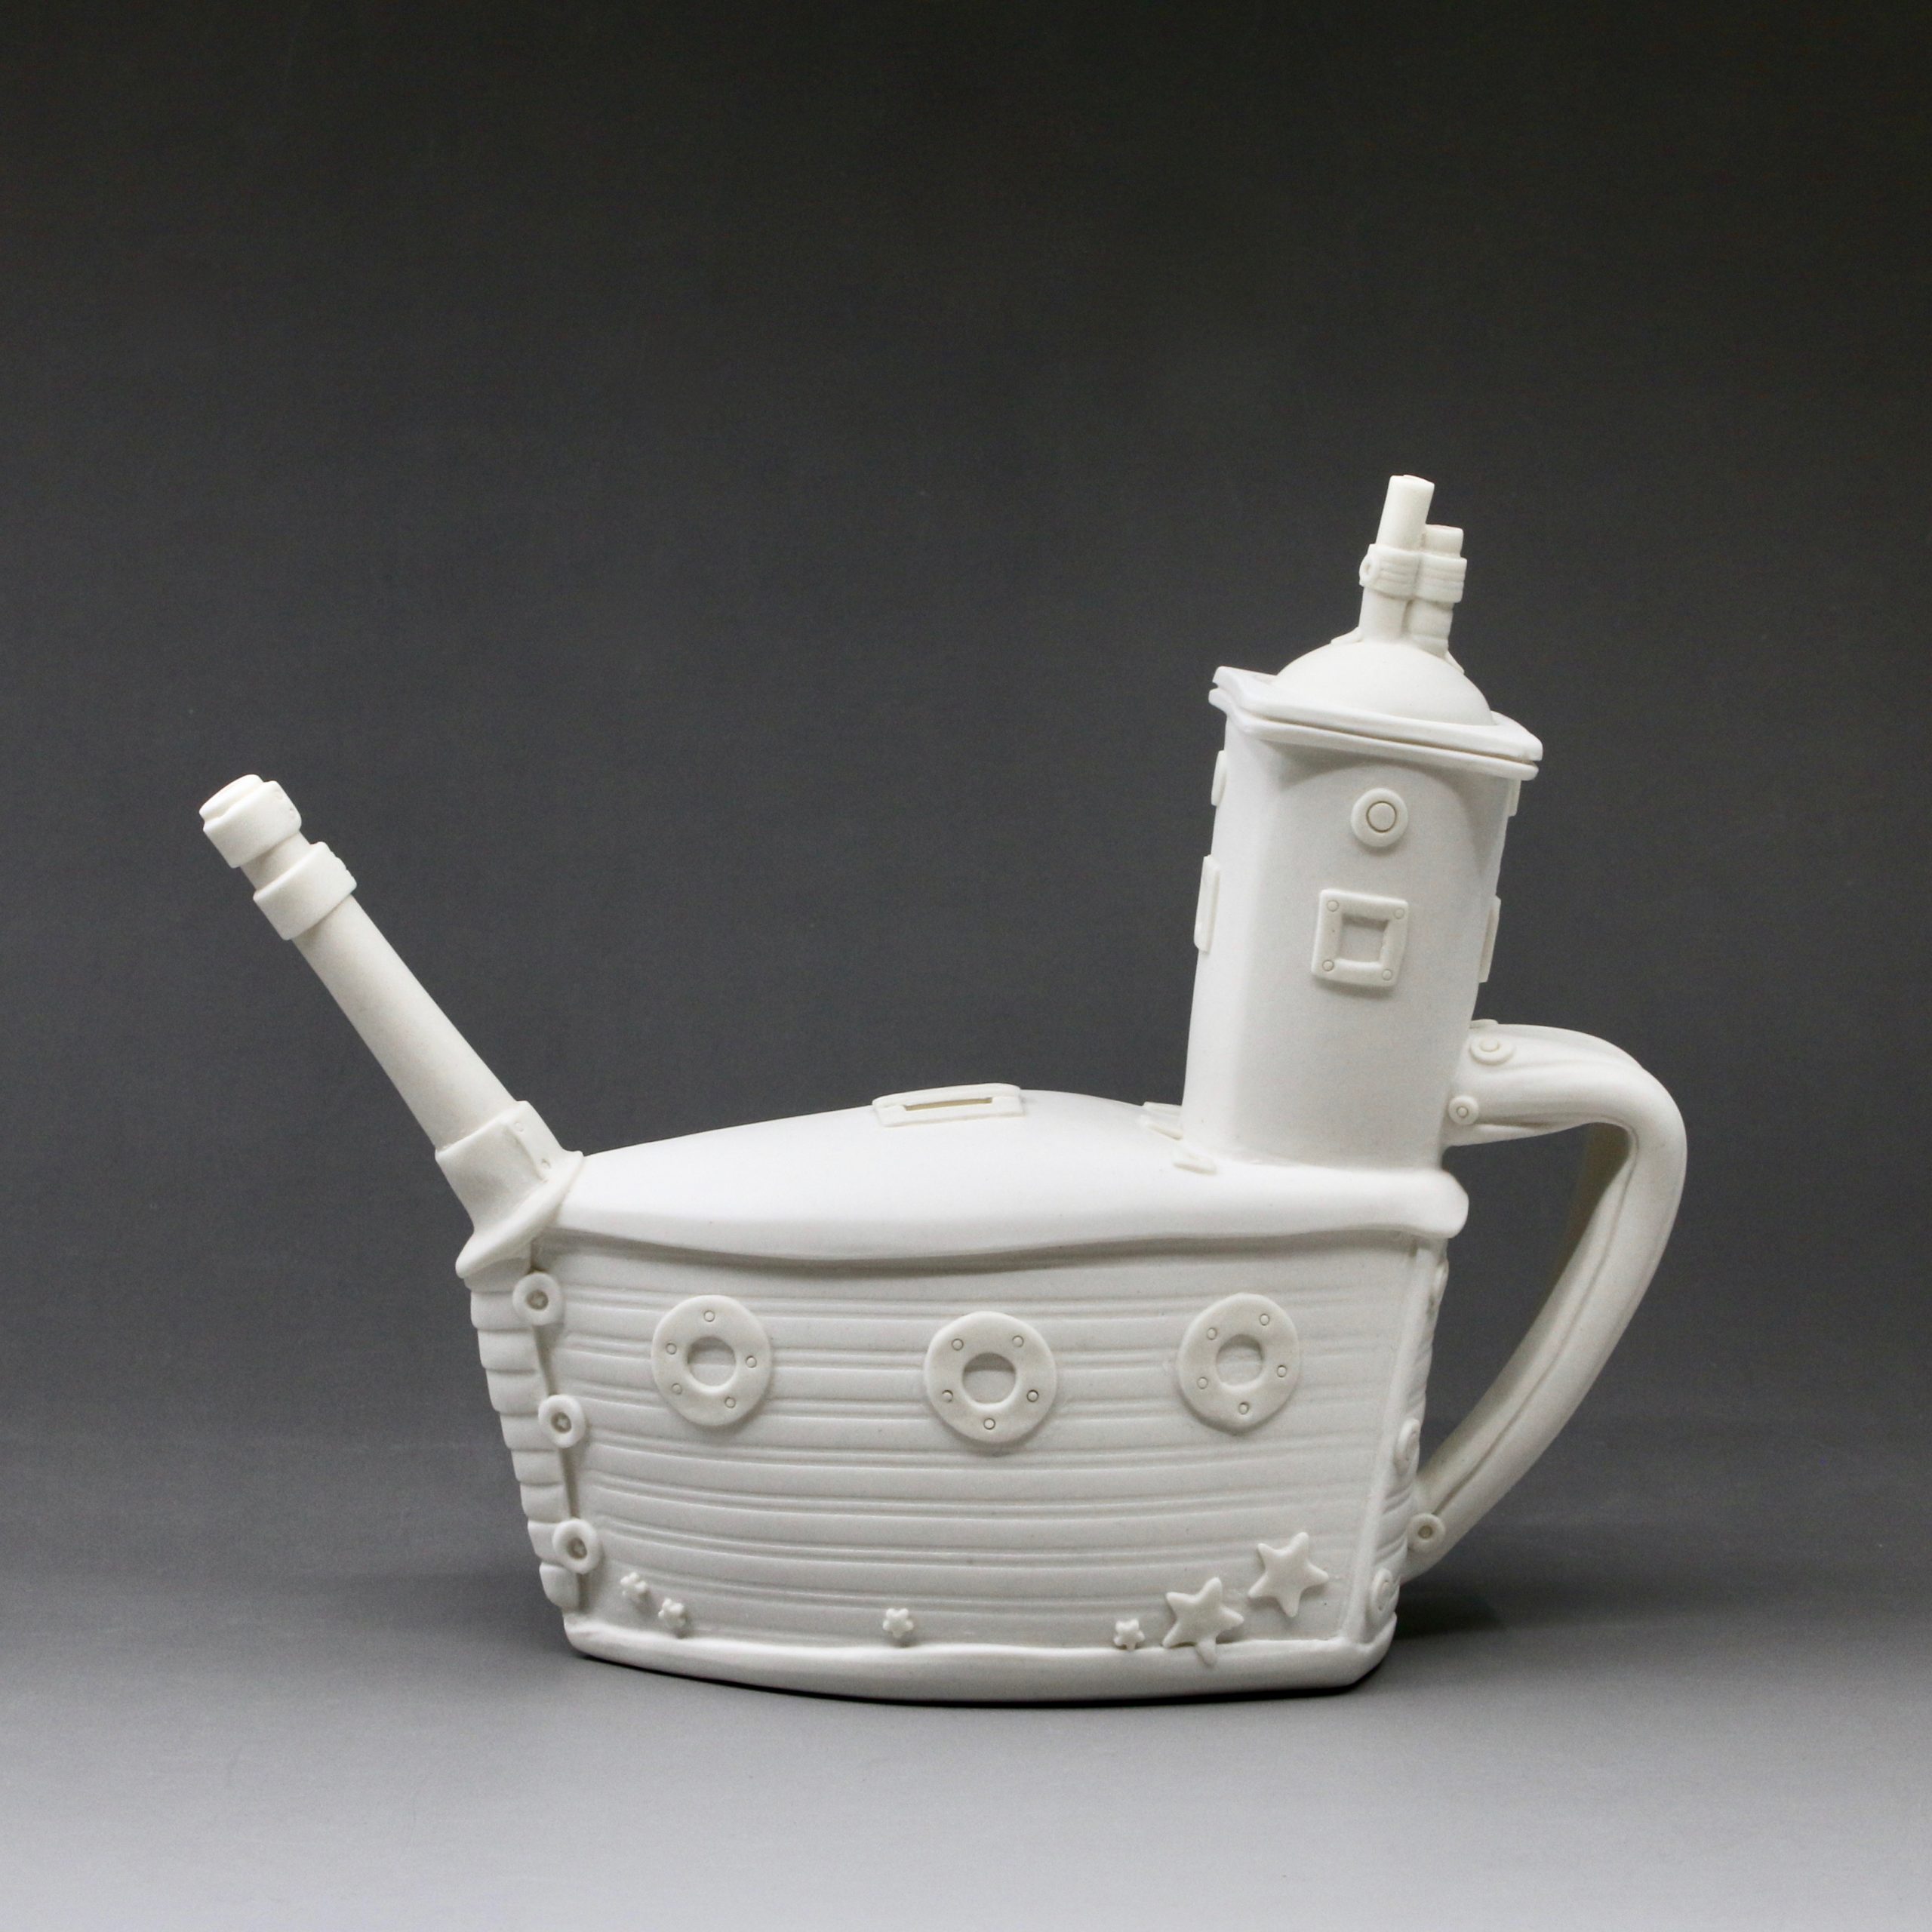 Leilani Trinka, Perahu Teapot, 7 1/2 in. (19 cm) in height, Cool Ice porcelain, clear glaze, fired to 2192°F (1200°C) in an electric kiln